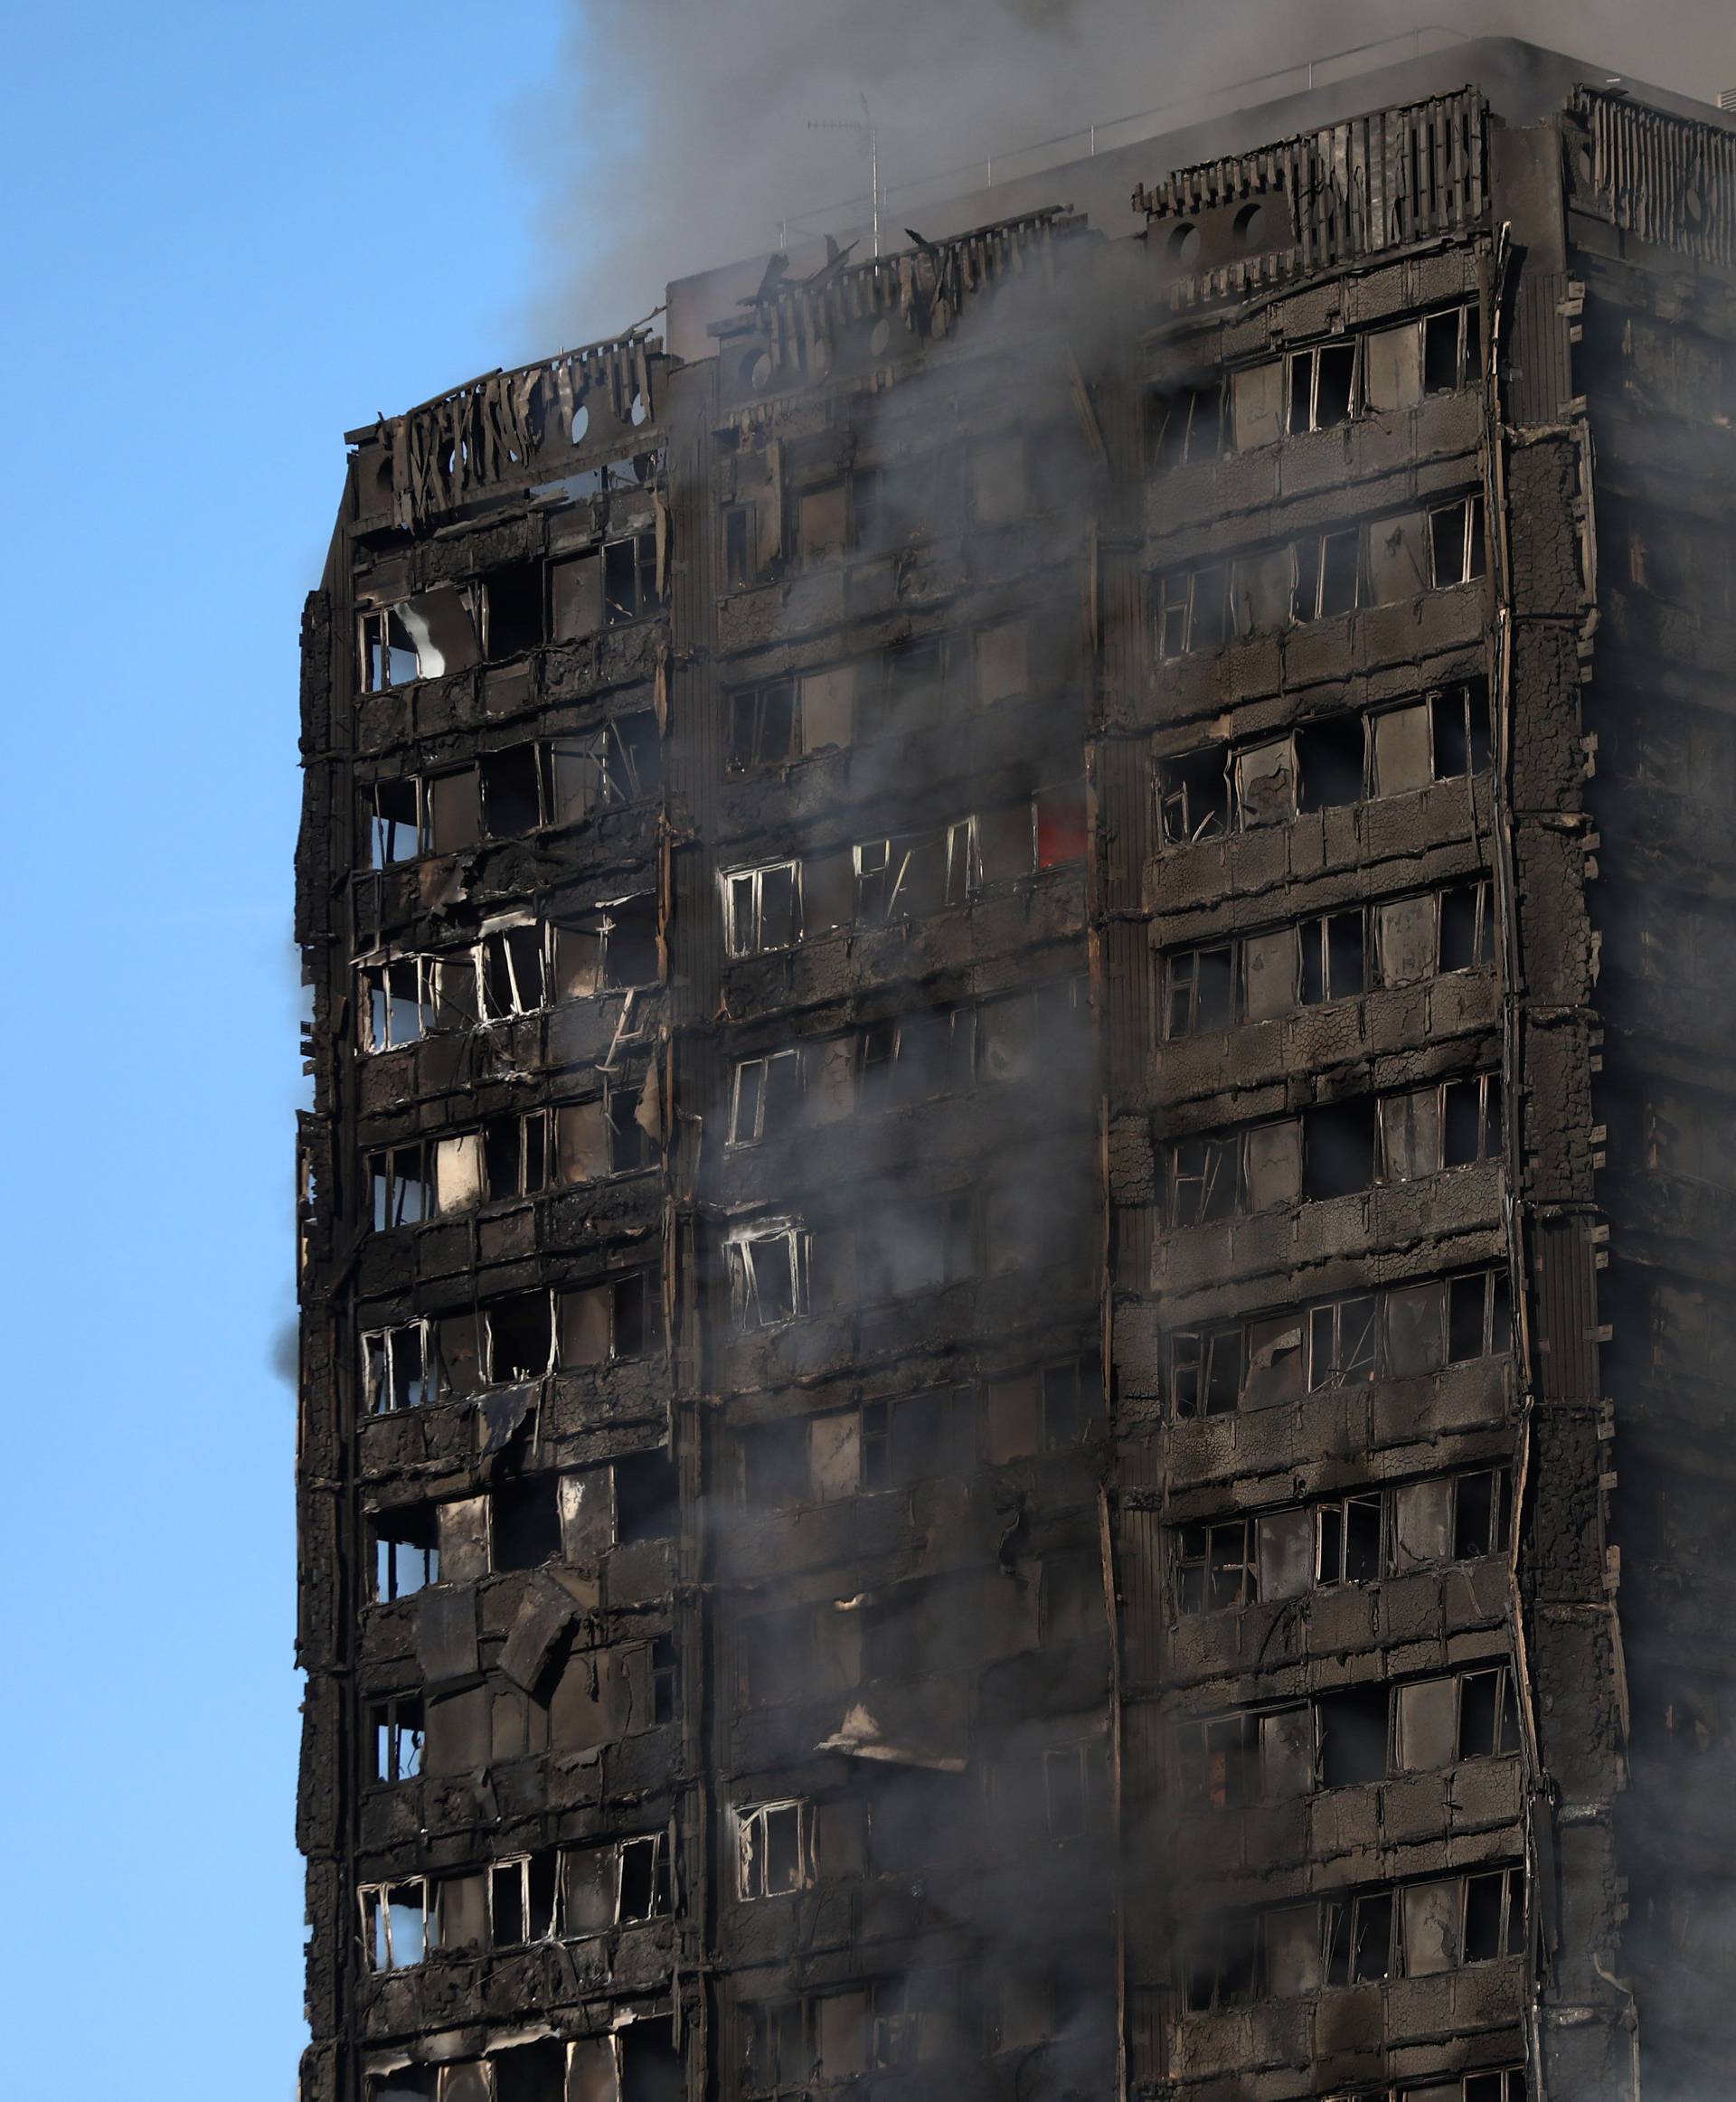 Smoke billows as firefighters tackle a serious fire in a tower block at Latimer Road in West London